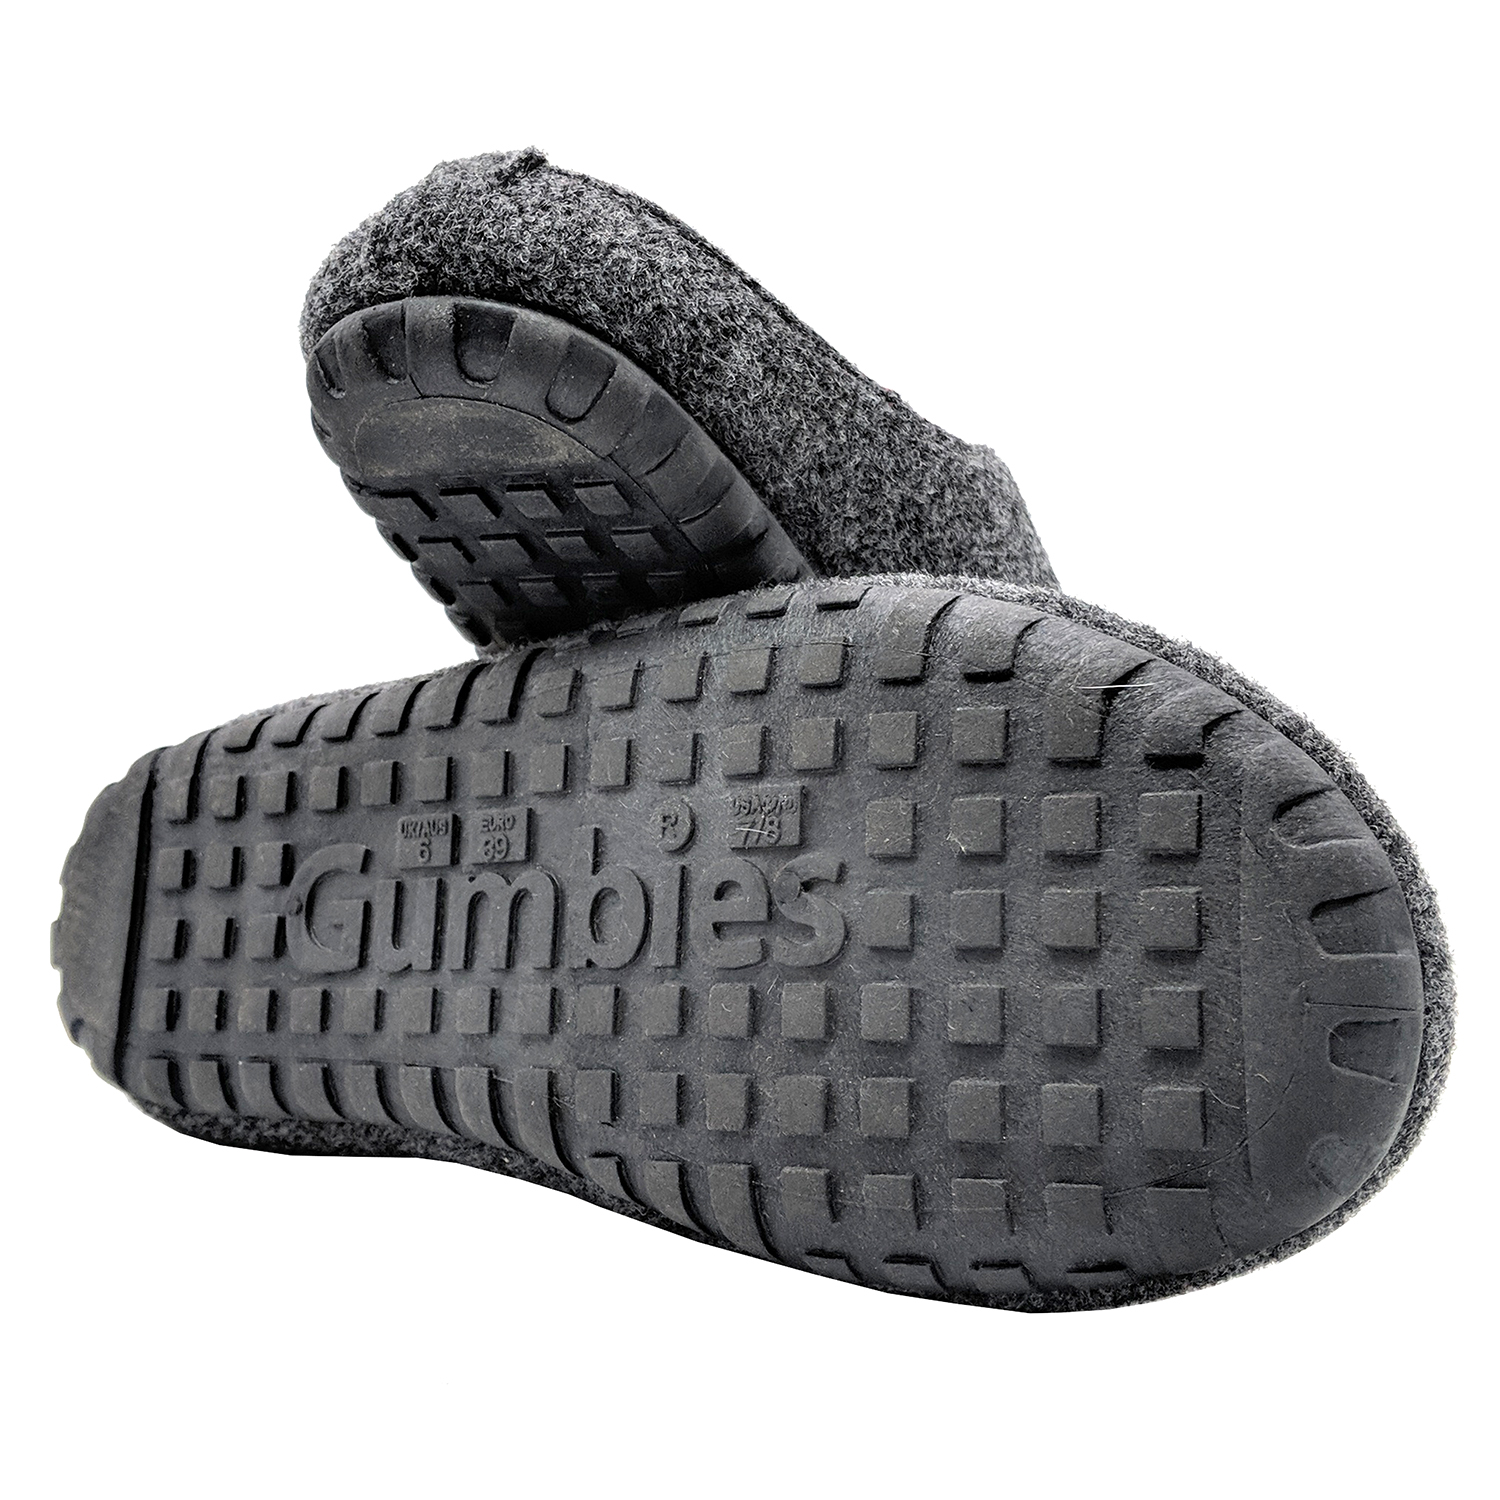 GUMBIES - Outback Slipper, CHARCOAL-TURQUOISE 